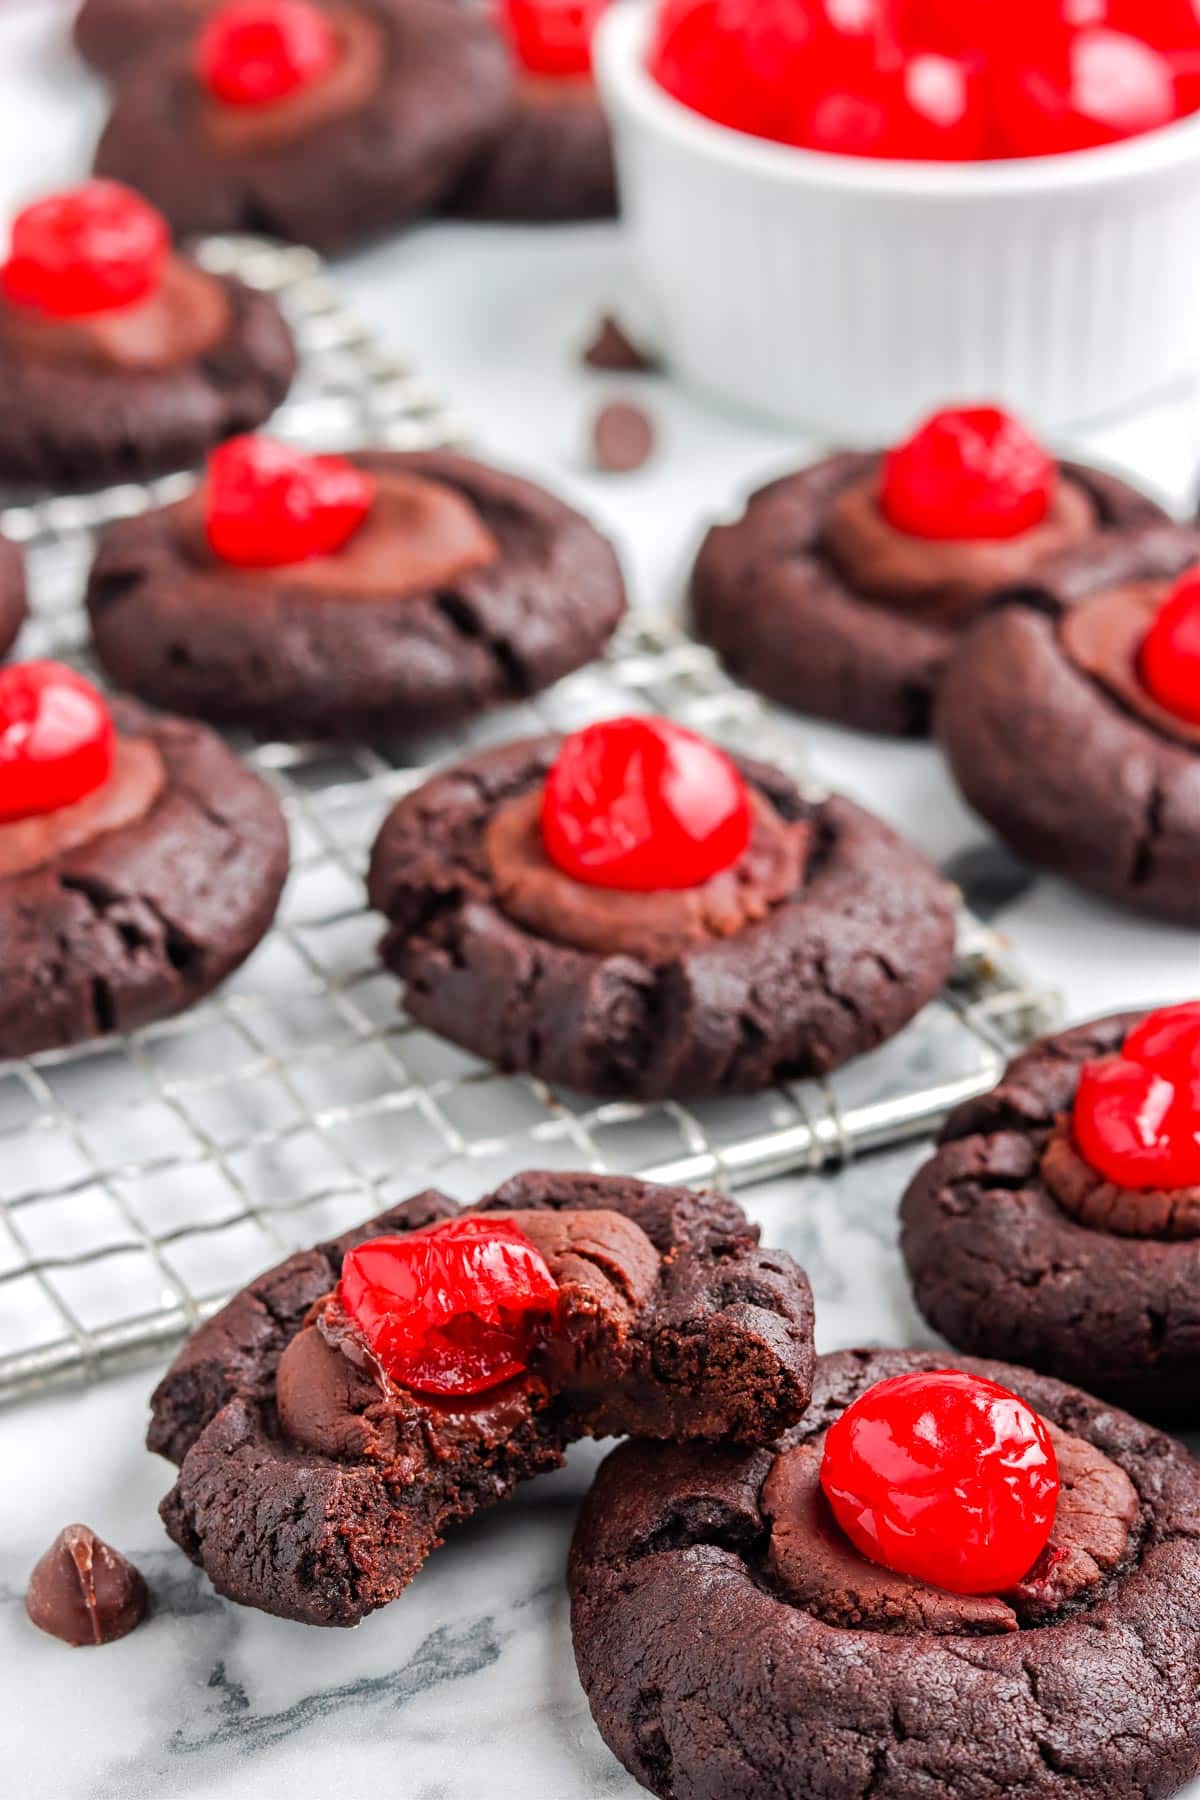 A close up picture of the finished Chocolate Covered Cherry Cookies recipe, one with a bite taken out of it.